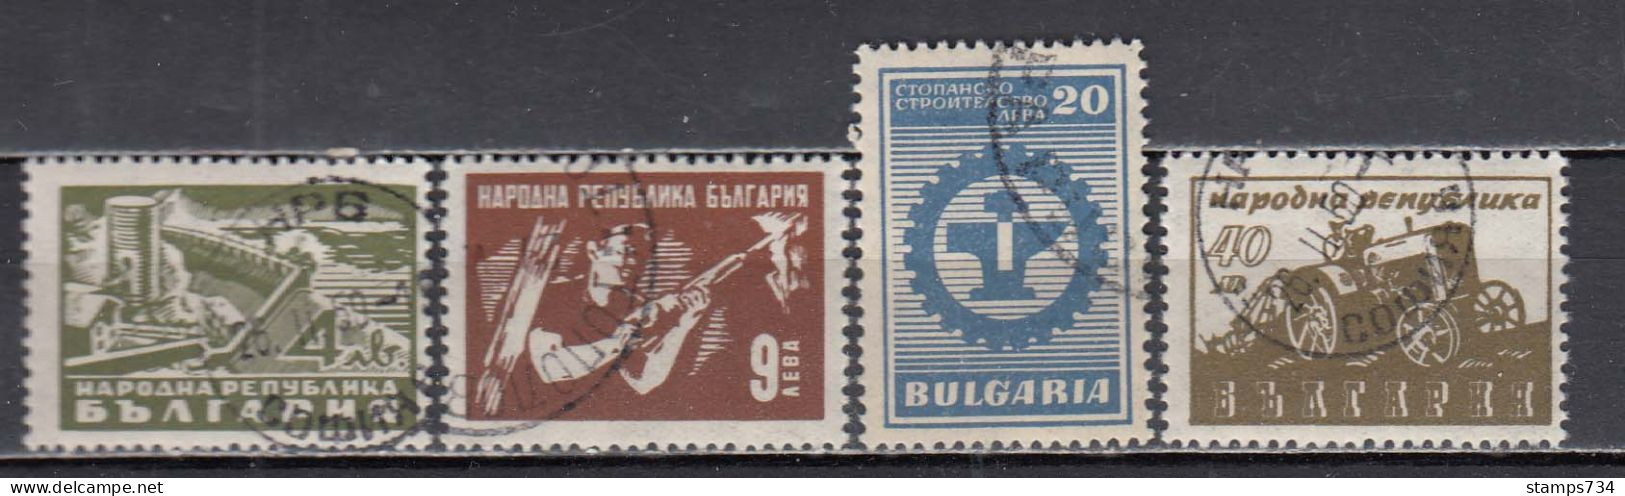 Bulgaria 1947 - Activites Industrielles, YT 566/69, Used - Used Stamps